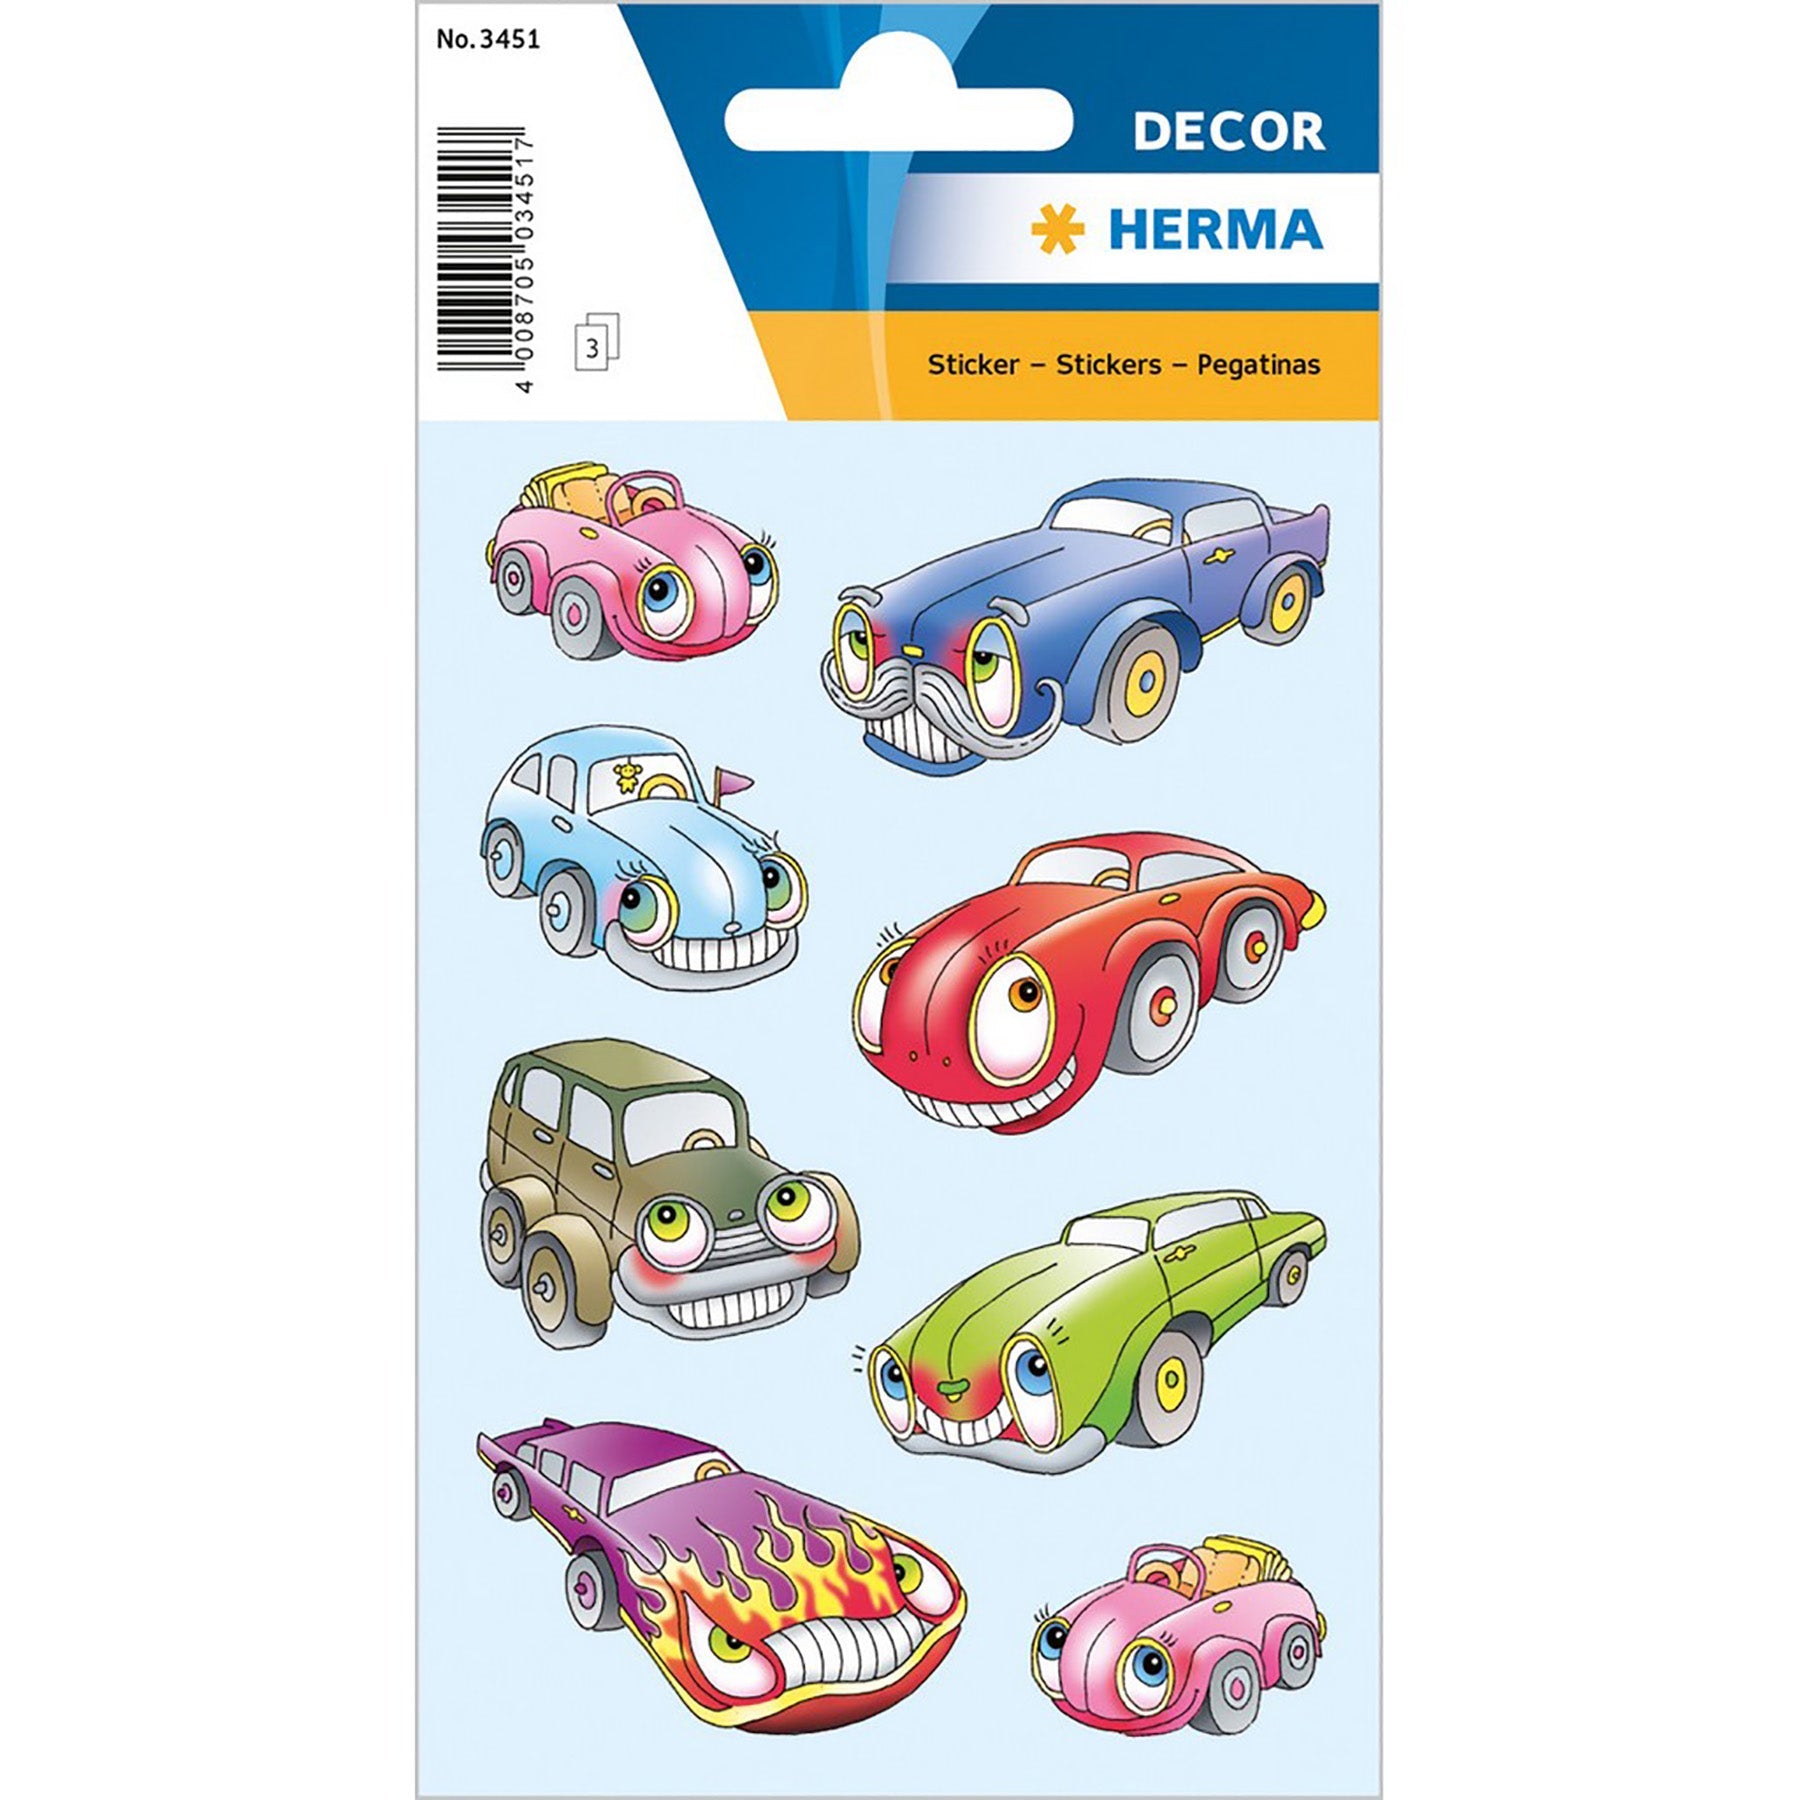 Herma Decor 3 Sheets Stickers Cars 4.75x3.1in Sheet